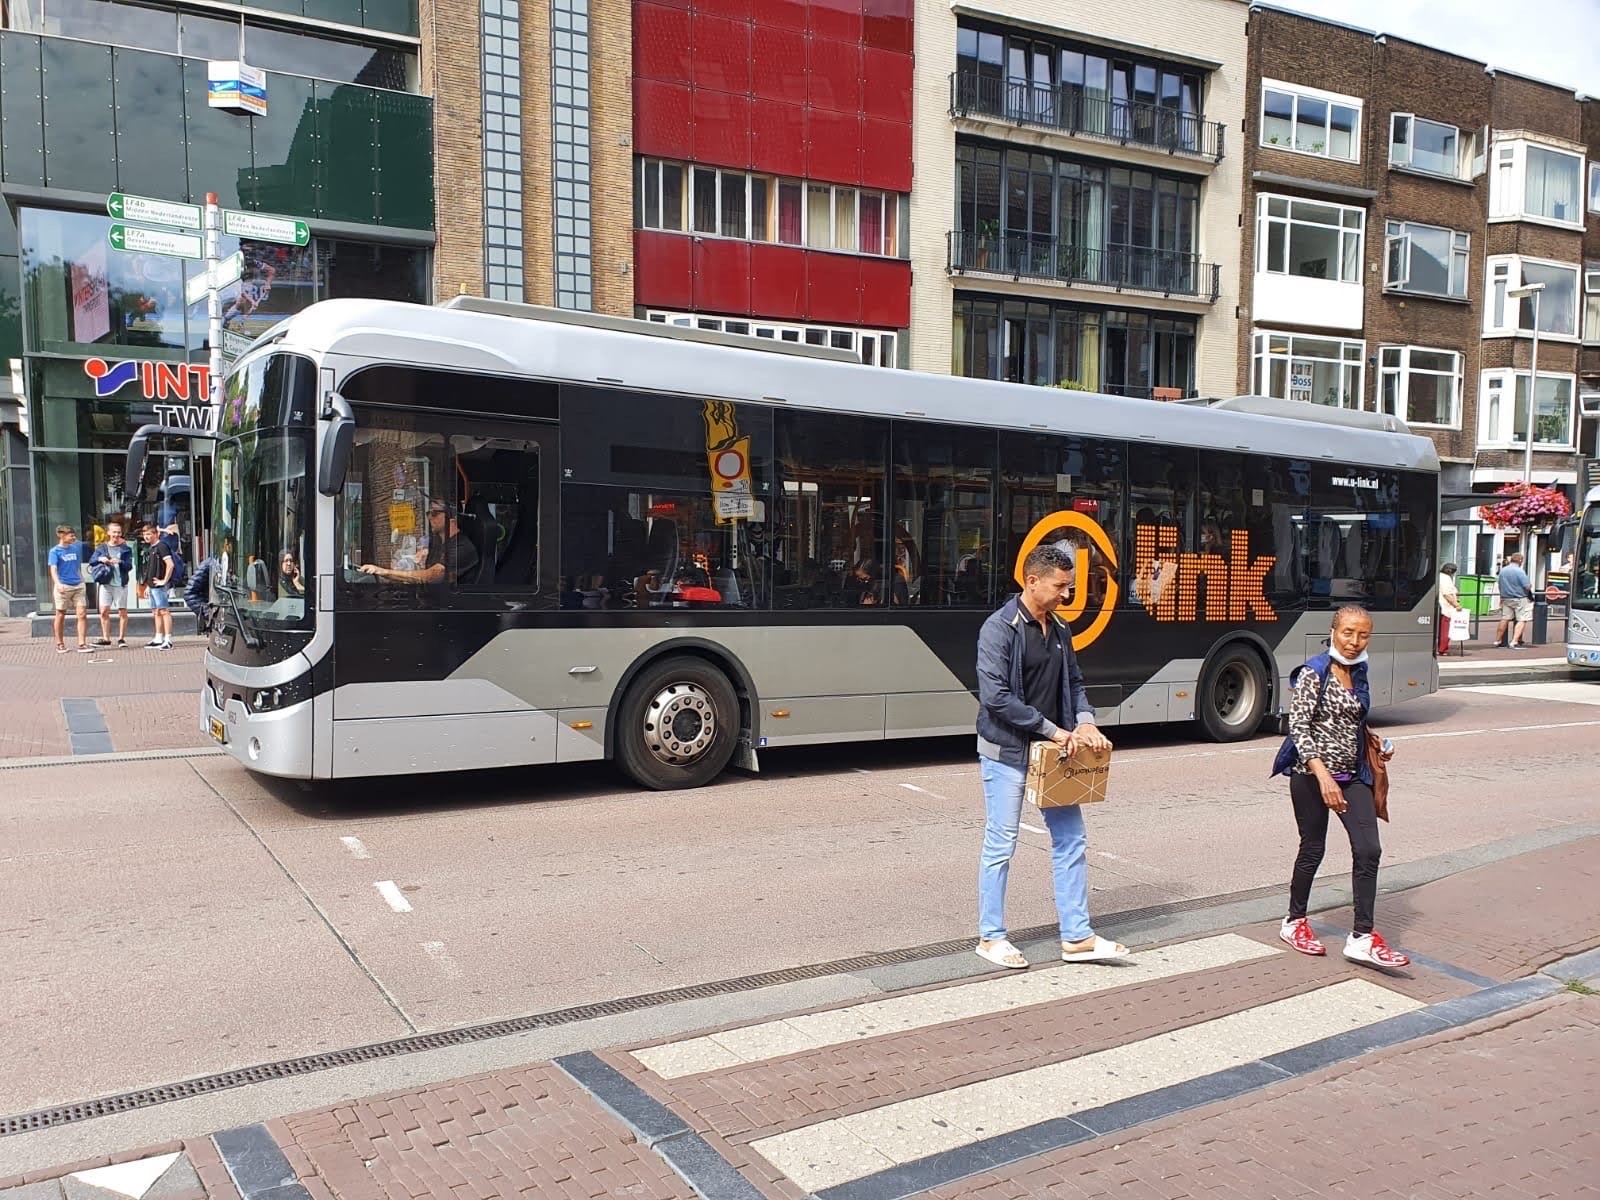 More electric buses in Utrecht’s public transport